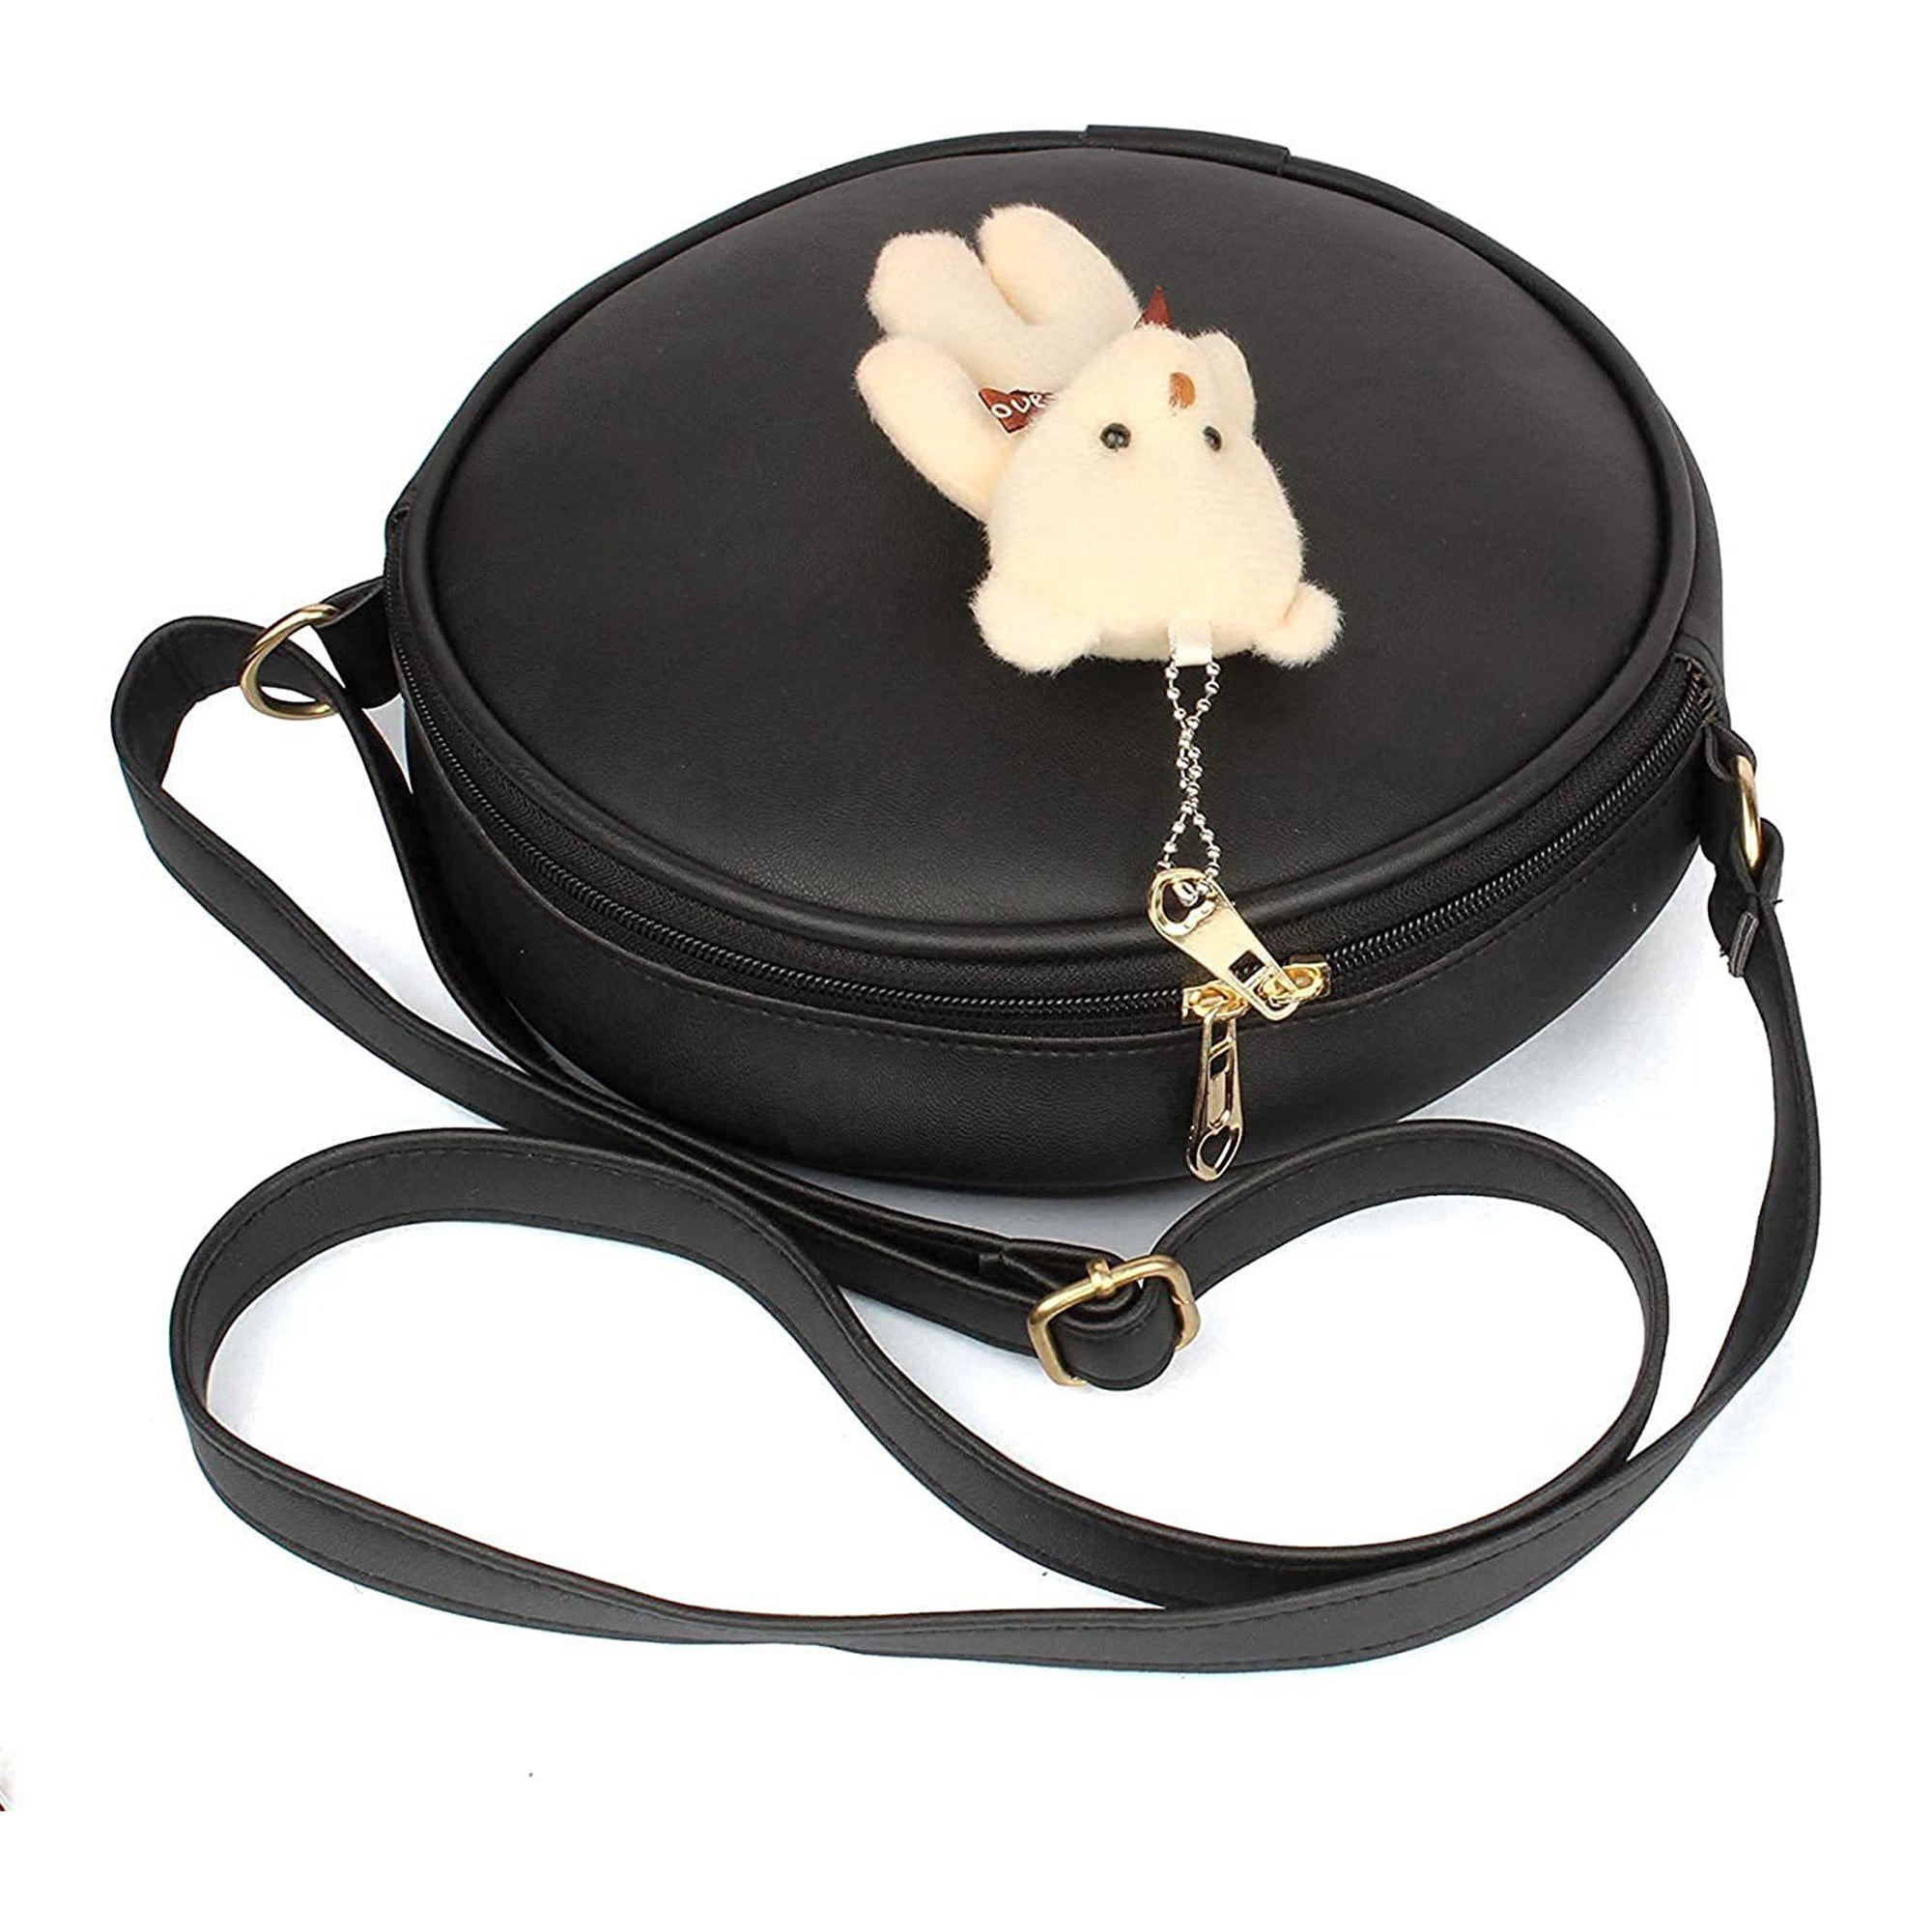 TMN - Women Black Vegan Leather Sling Bag with Attached Teddy